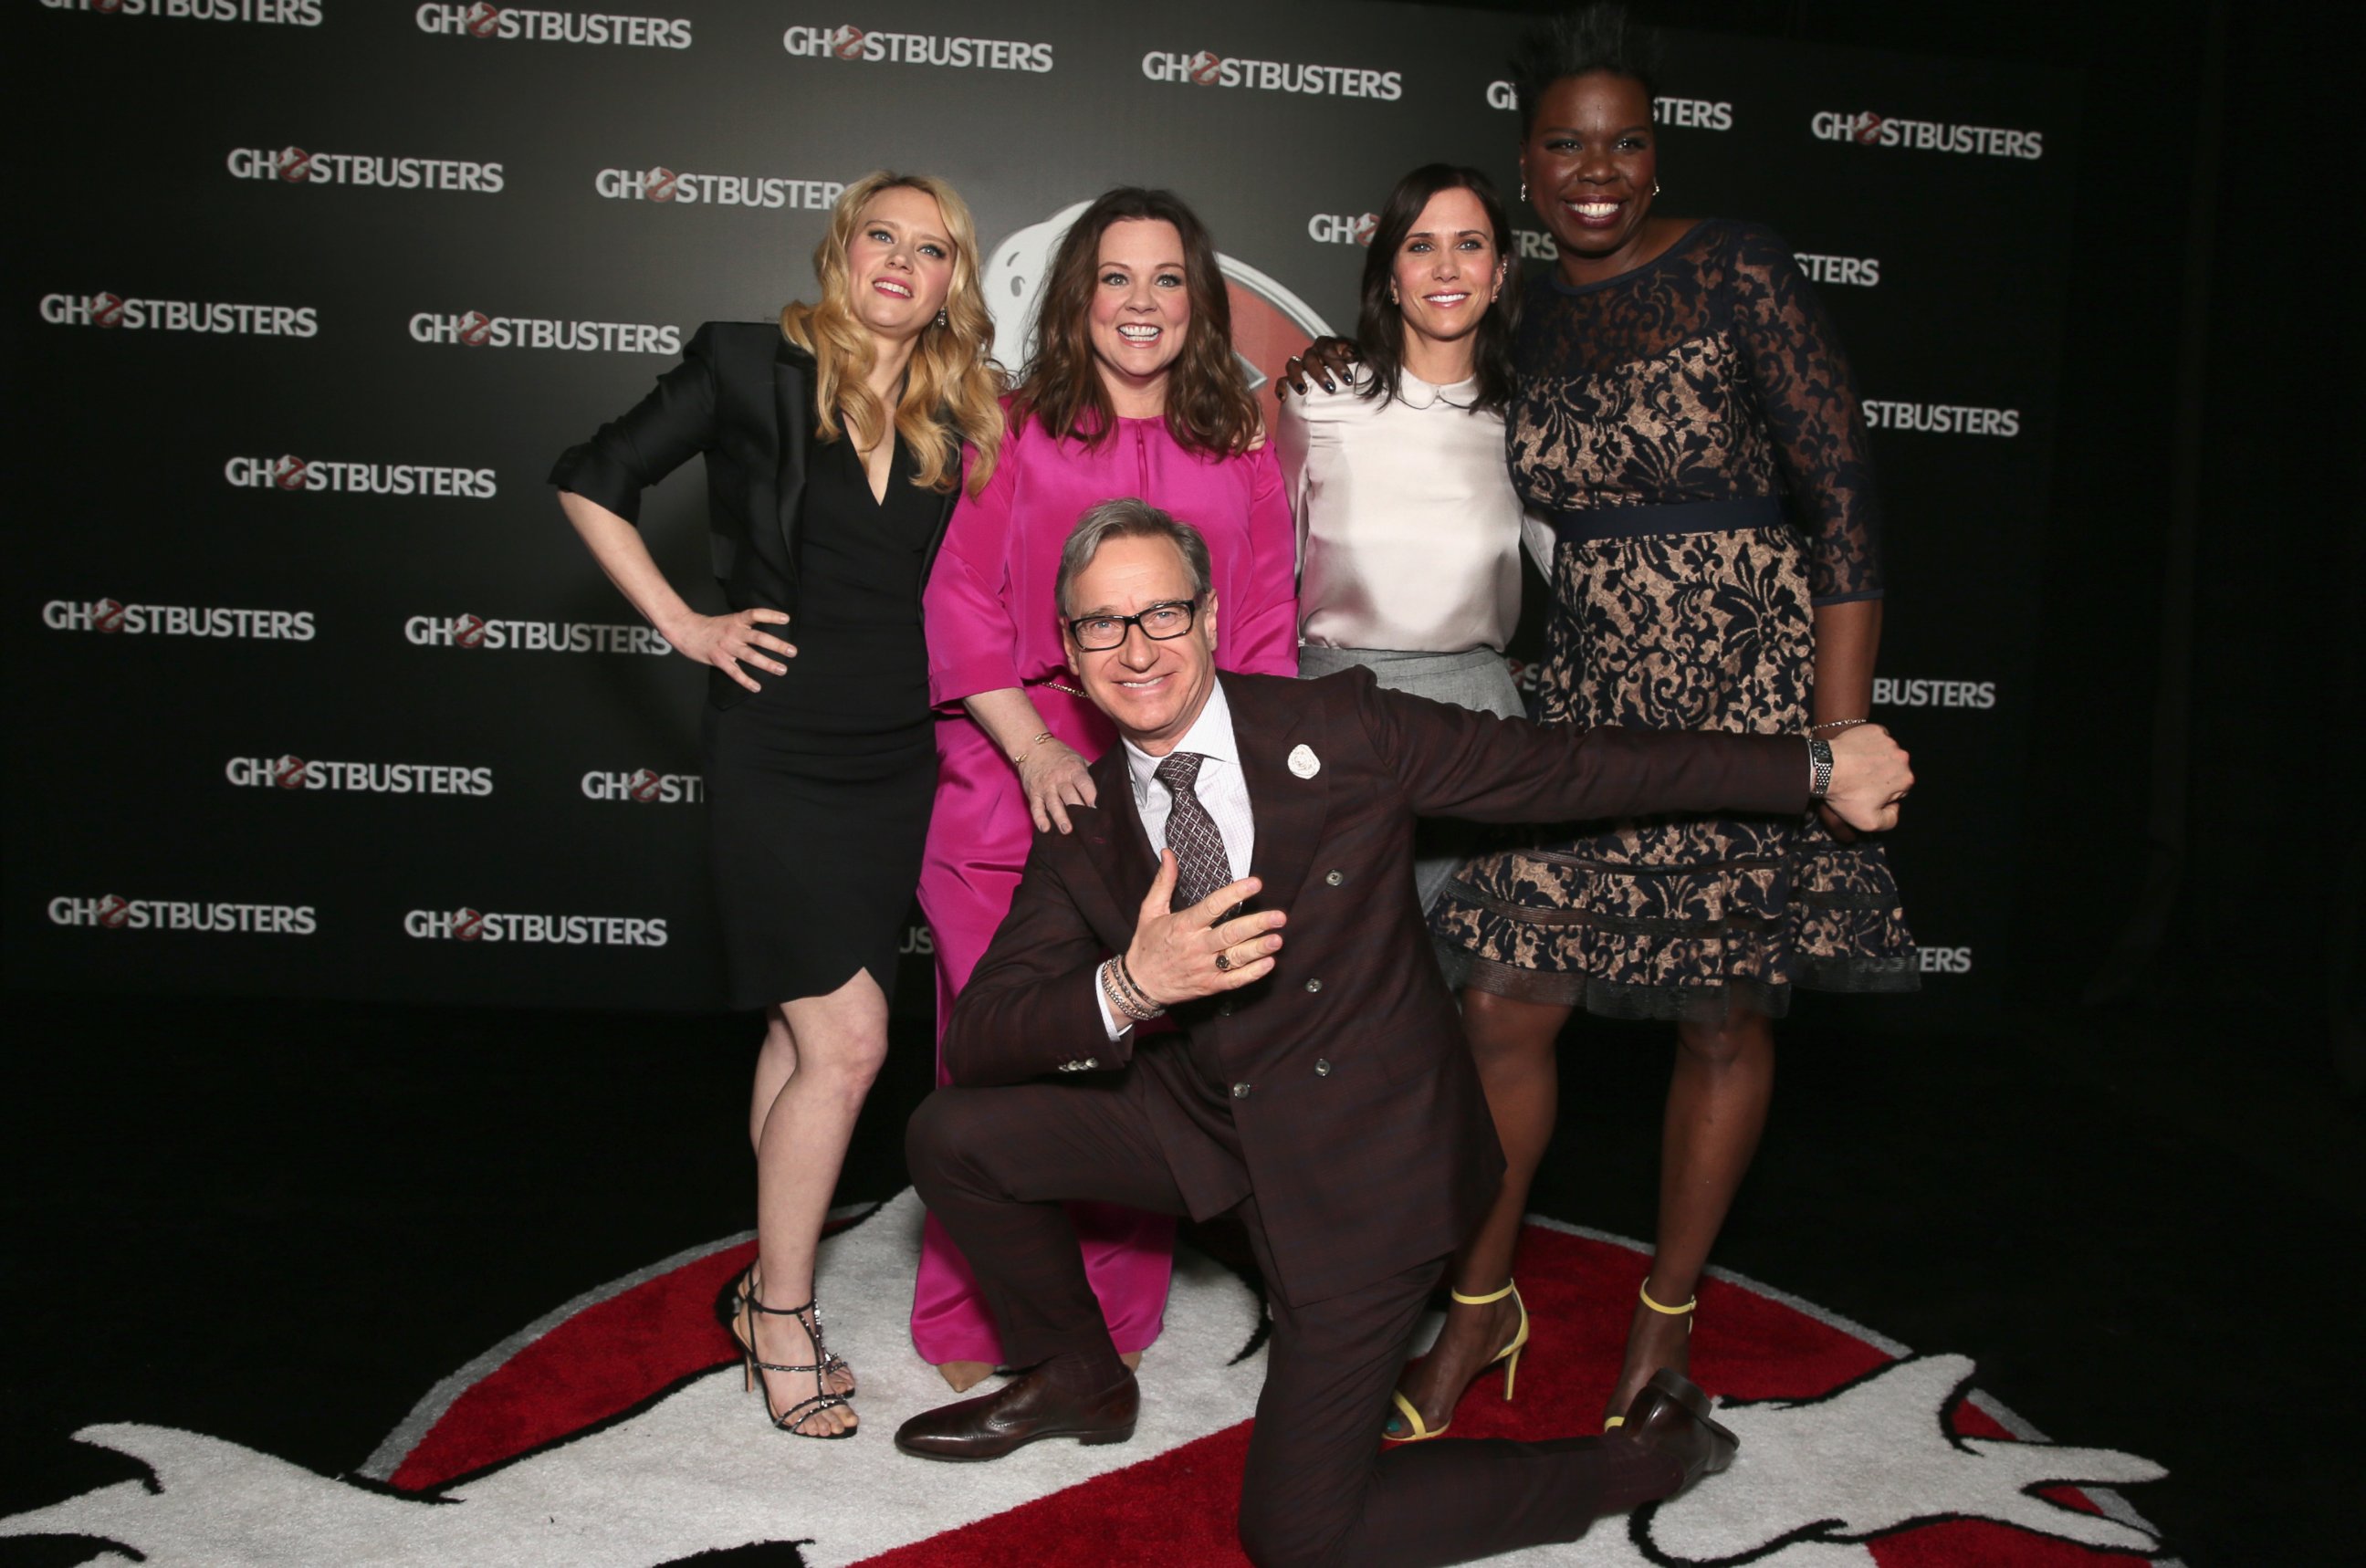 PHOTO: From left, actresses Kate McKinnon, Melissa McCarthy, Kristen Wiig, Leslie Jones and 'Ghostbusters' director Paul Feig attend CinemaCon, April 12, 2016 in Las Vegas.  